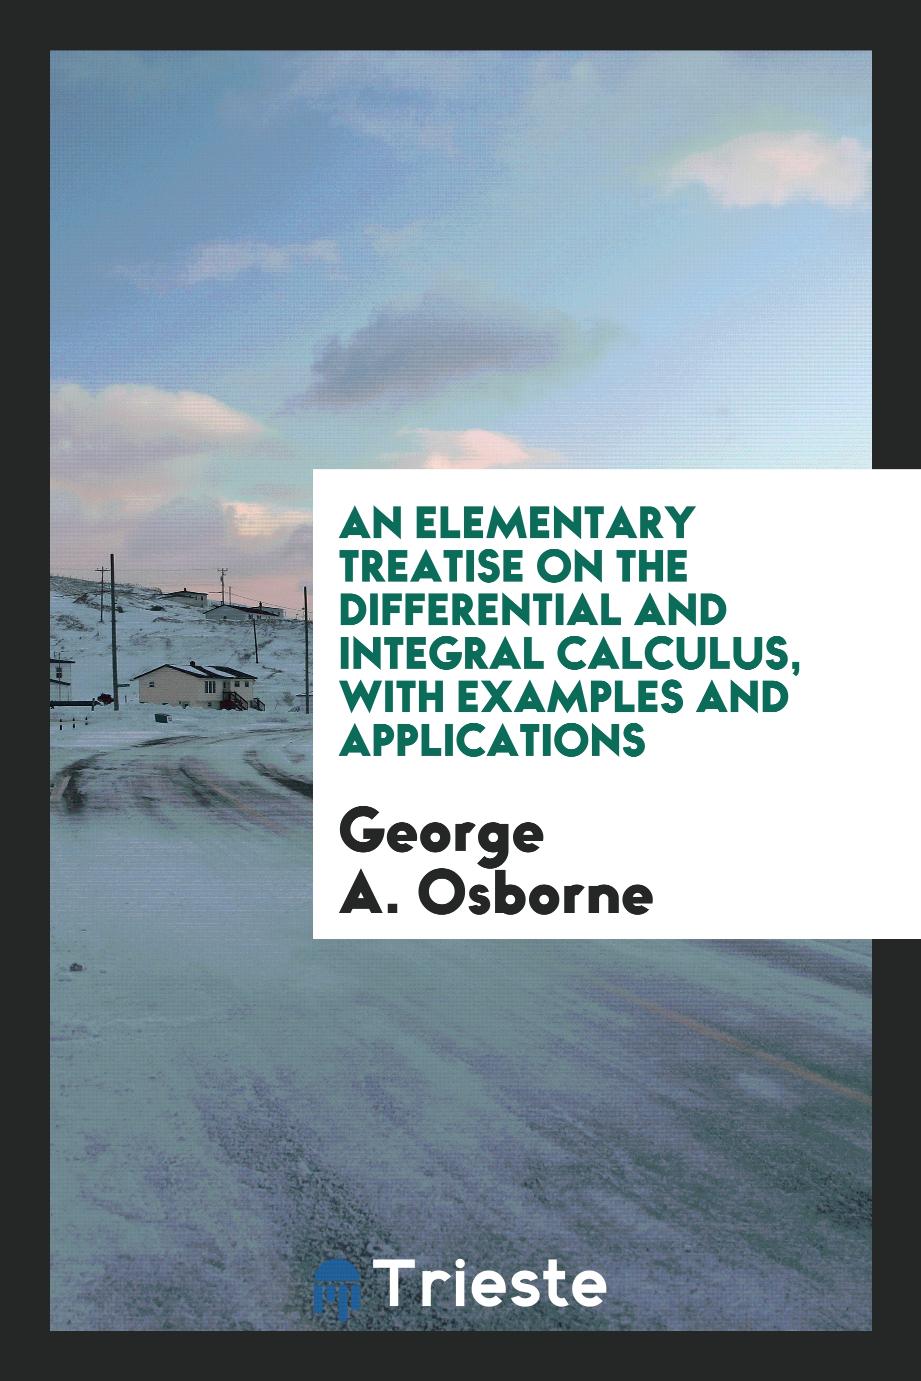 George A. Osborne - An Elementary Treatise on the Differential and Integral Calculus, with Examples and Applications